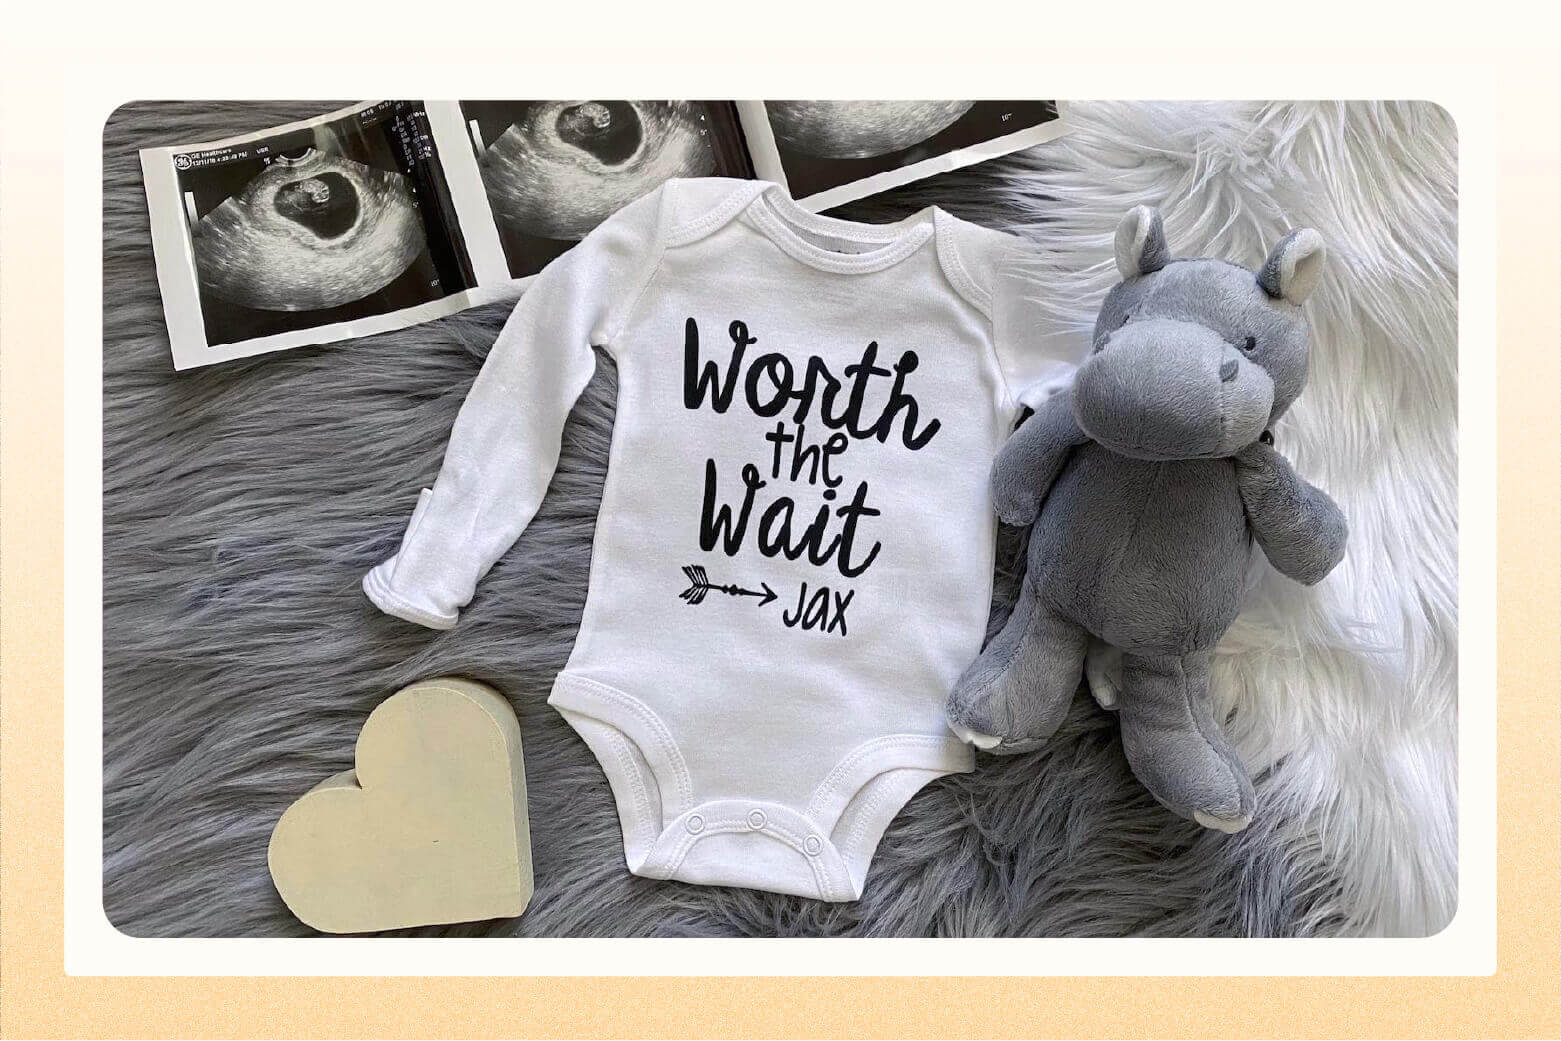 White long sleeved onesie that says "Worth the wait, Jax" laid on grey furry rug next to a sonogram and stuffed animal